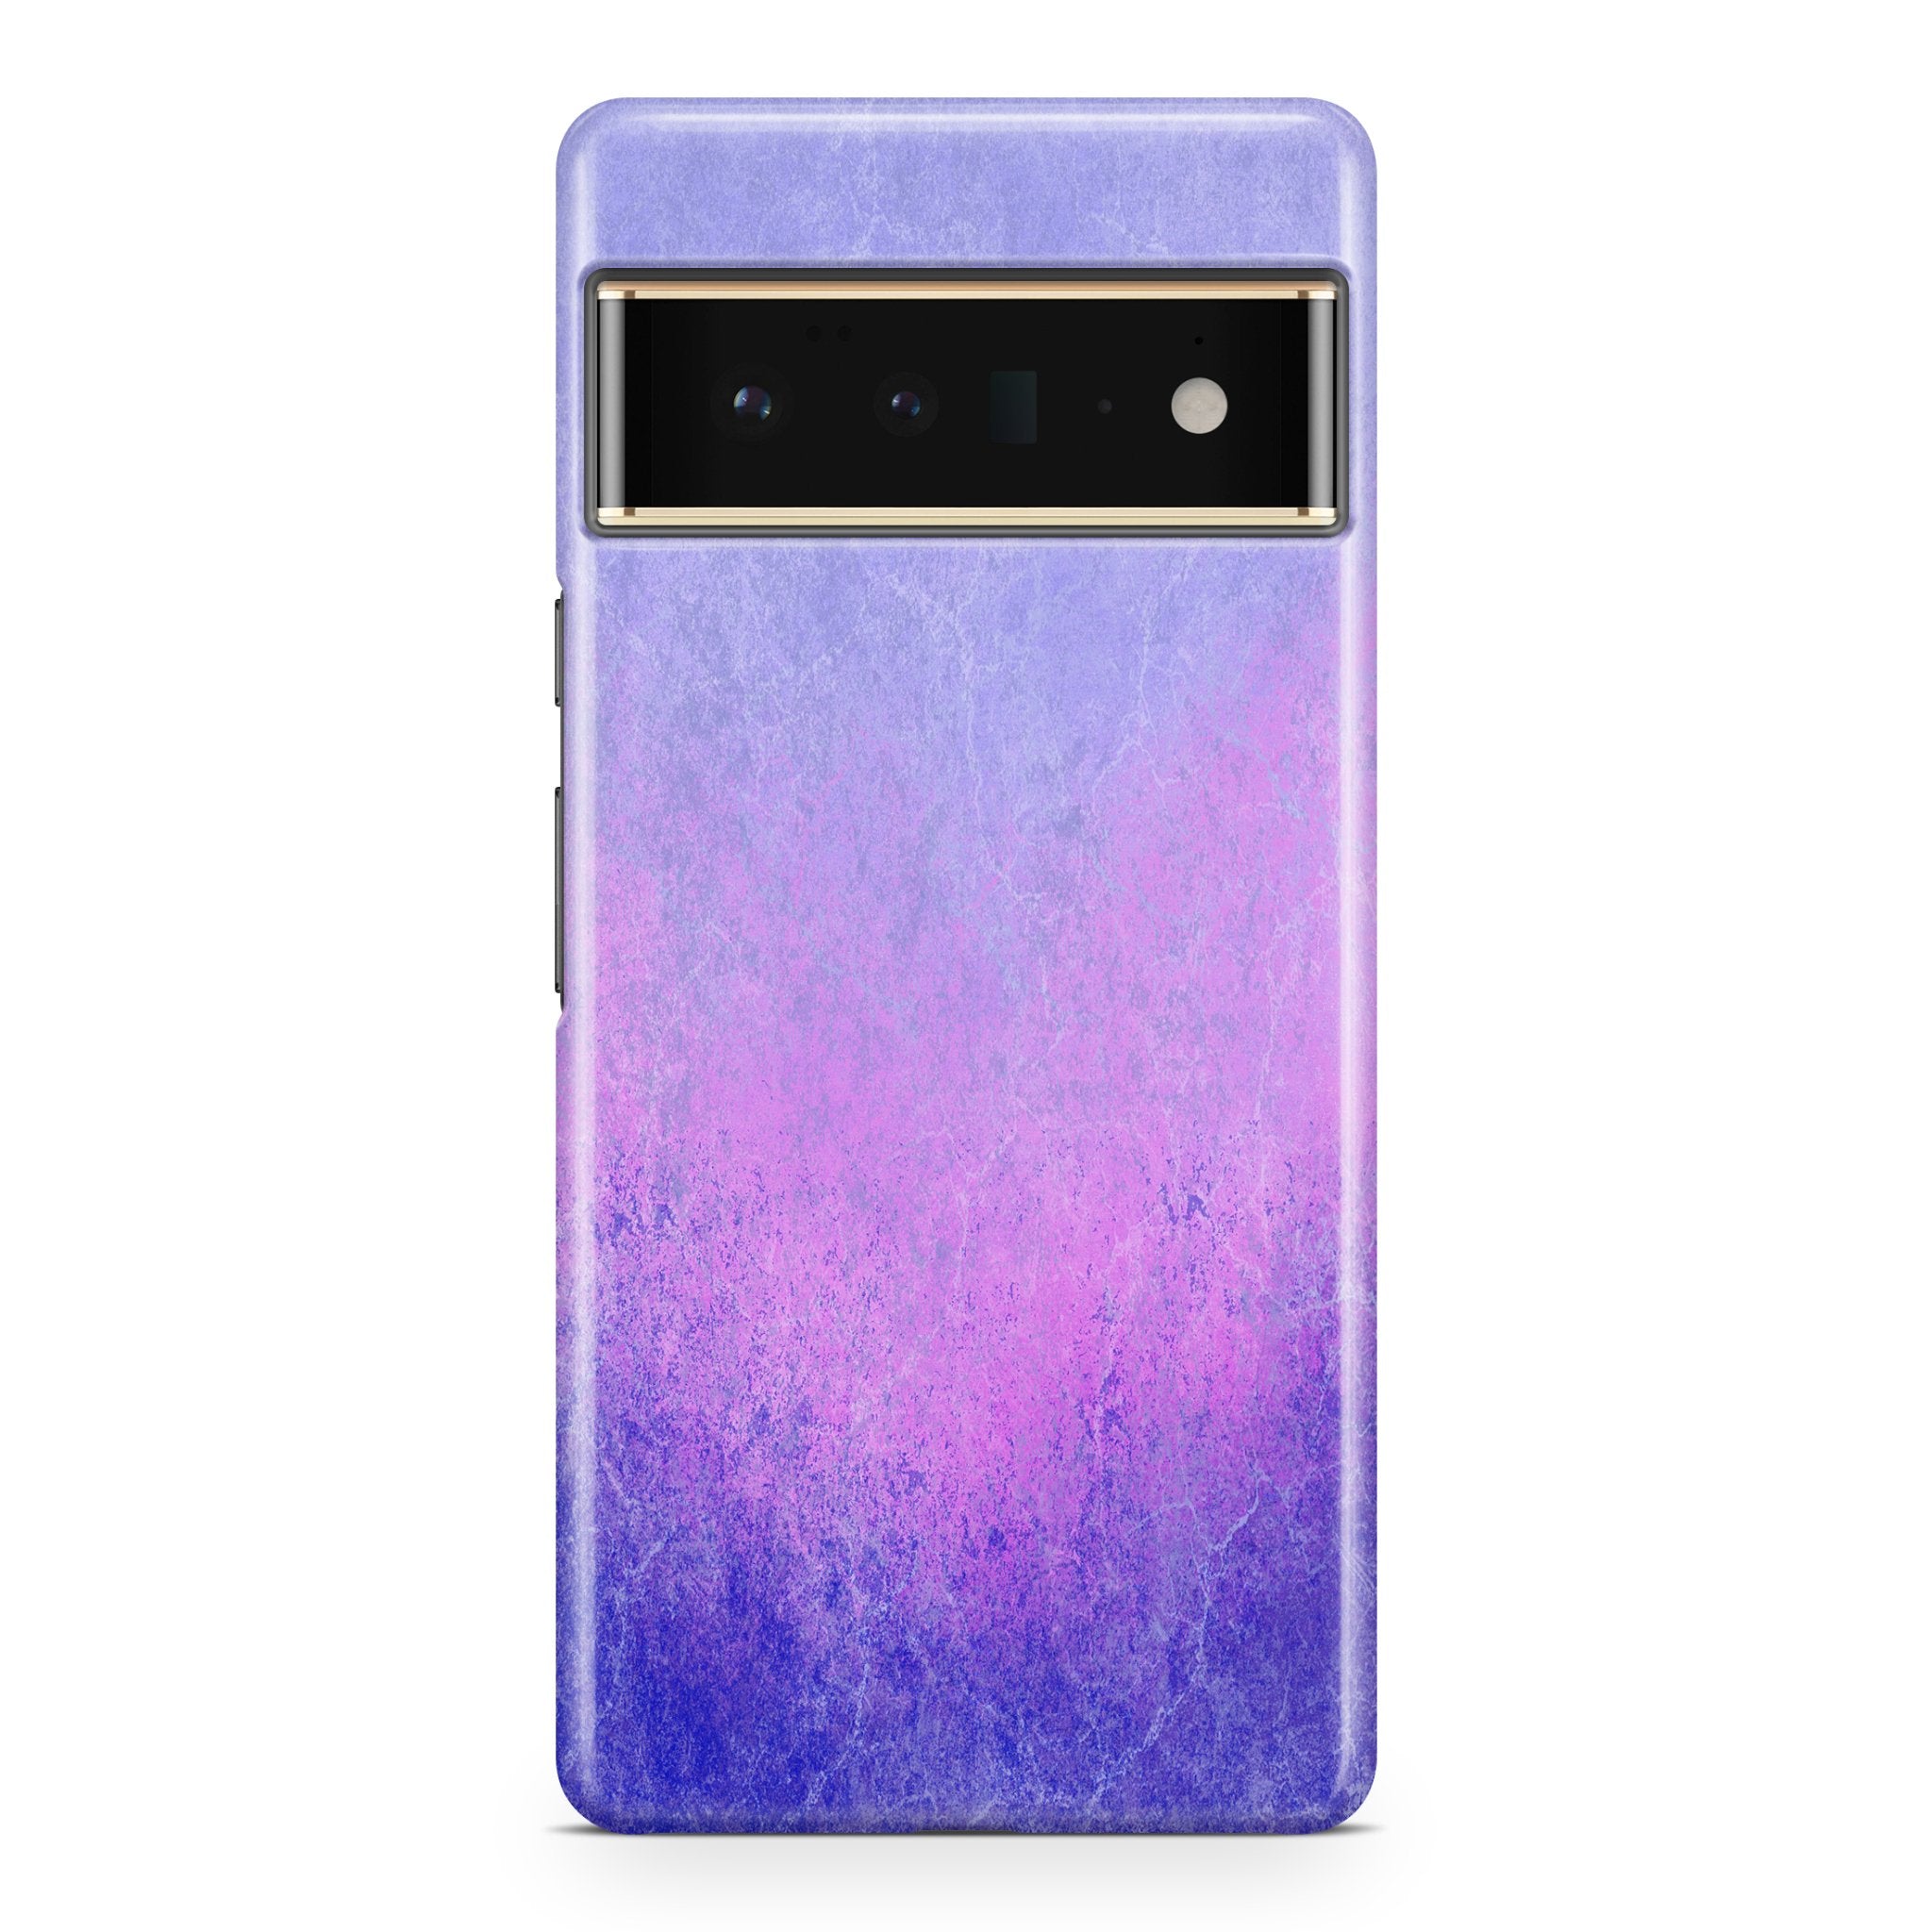 Fracture Lilac - Google phone case designs by CaseSwagger